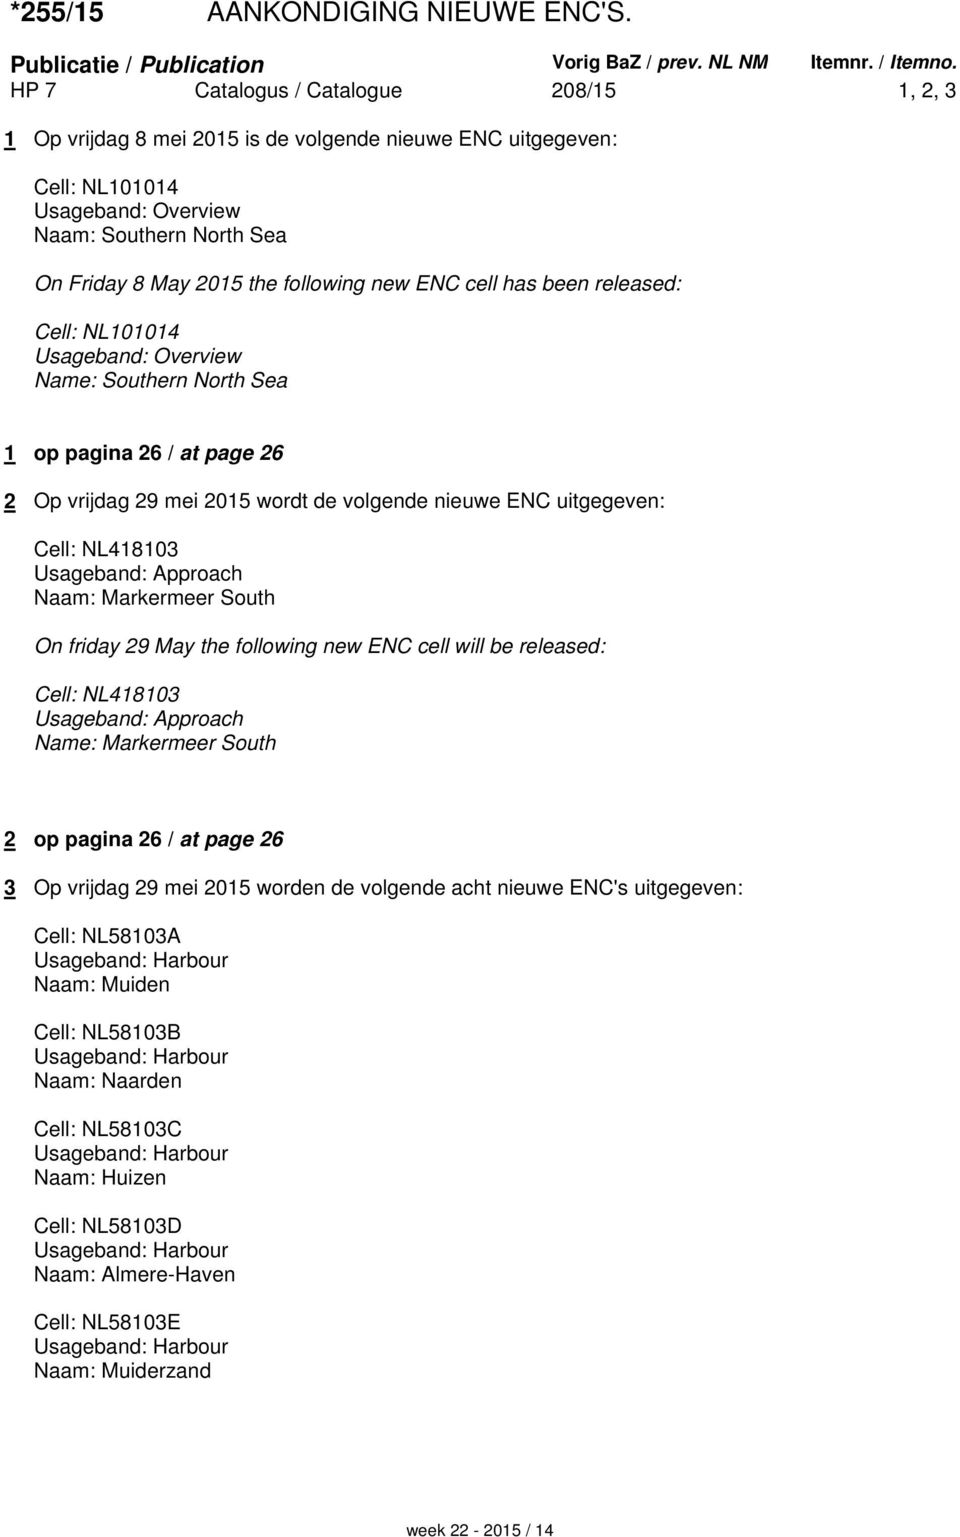 new ENC cell has been released: Cell: NL101014 Usageband: Overview Name: Southern North Sea 1 op pagina 26 / at page 26 2 Op vrijdag 29 mei 2015 wordt de volgende nieuwe ENC uitgegeven: Cell: